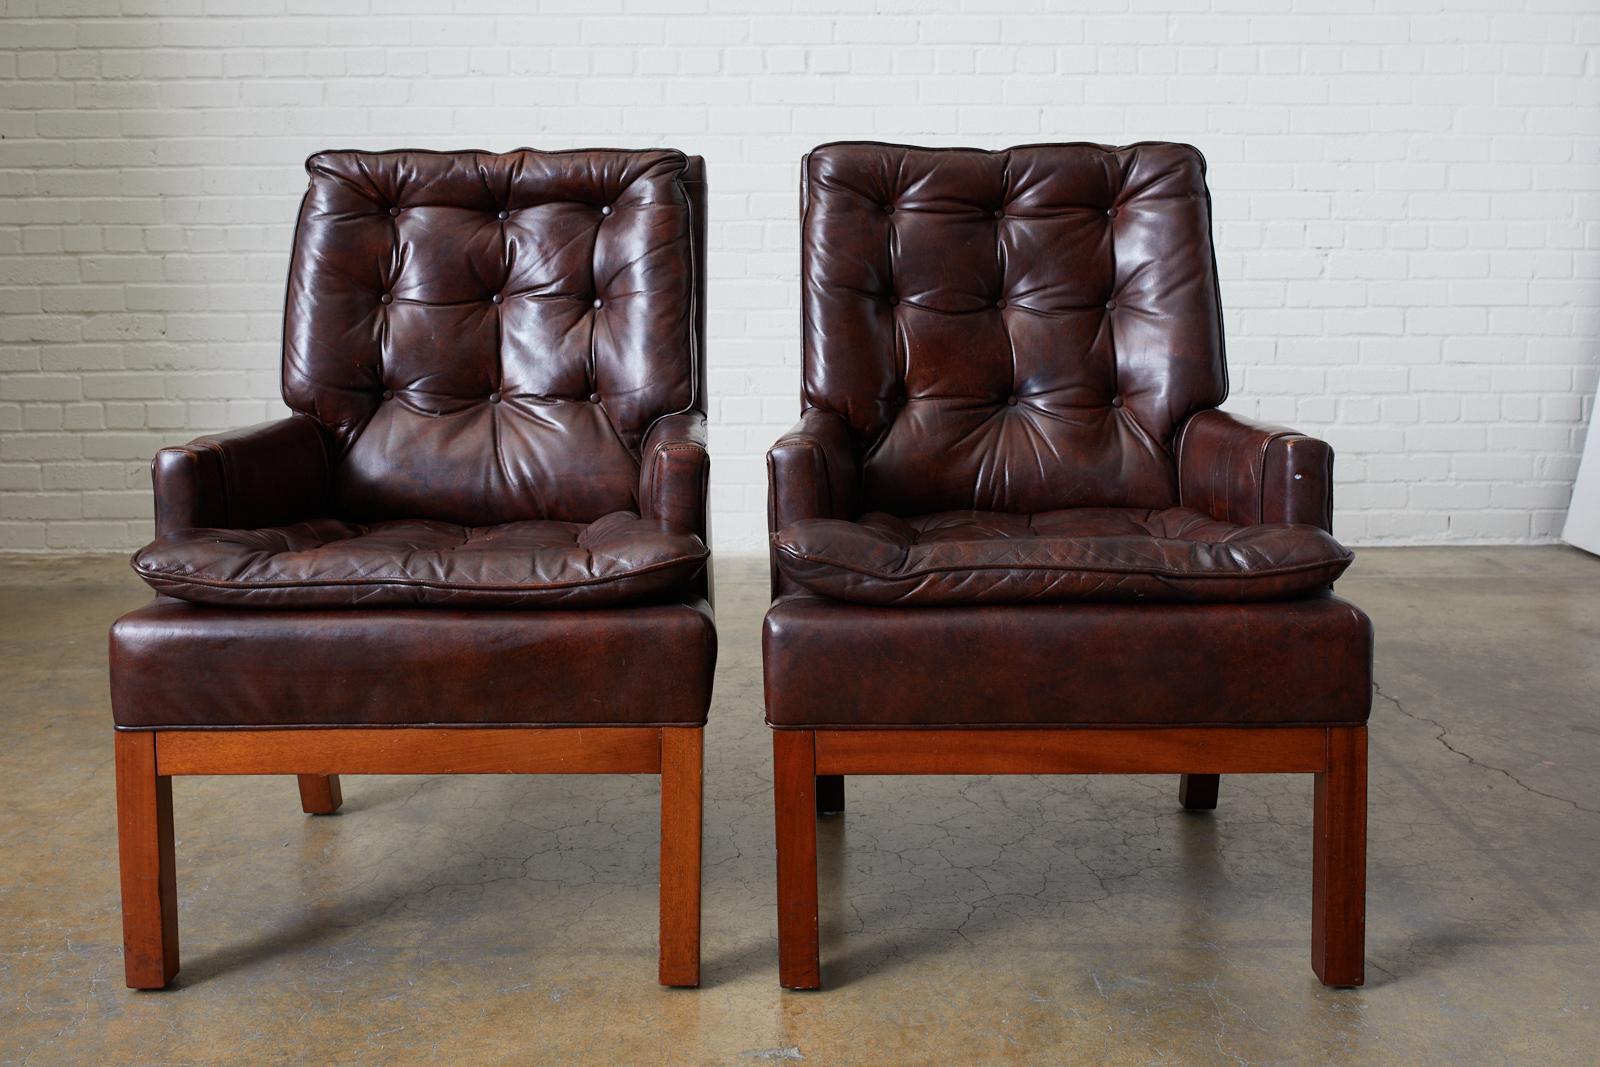 Mid-Century Modern pair of dark chocolate brown tufted library chairs or club chairs. Upholstered in a bonded tufted leather with a parson style wood leg. Very comfortable with soft tufted cushions.